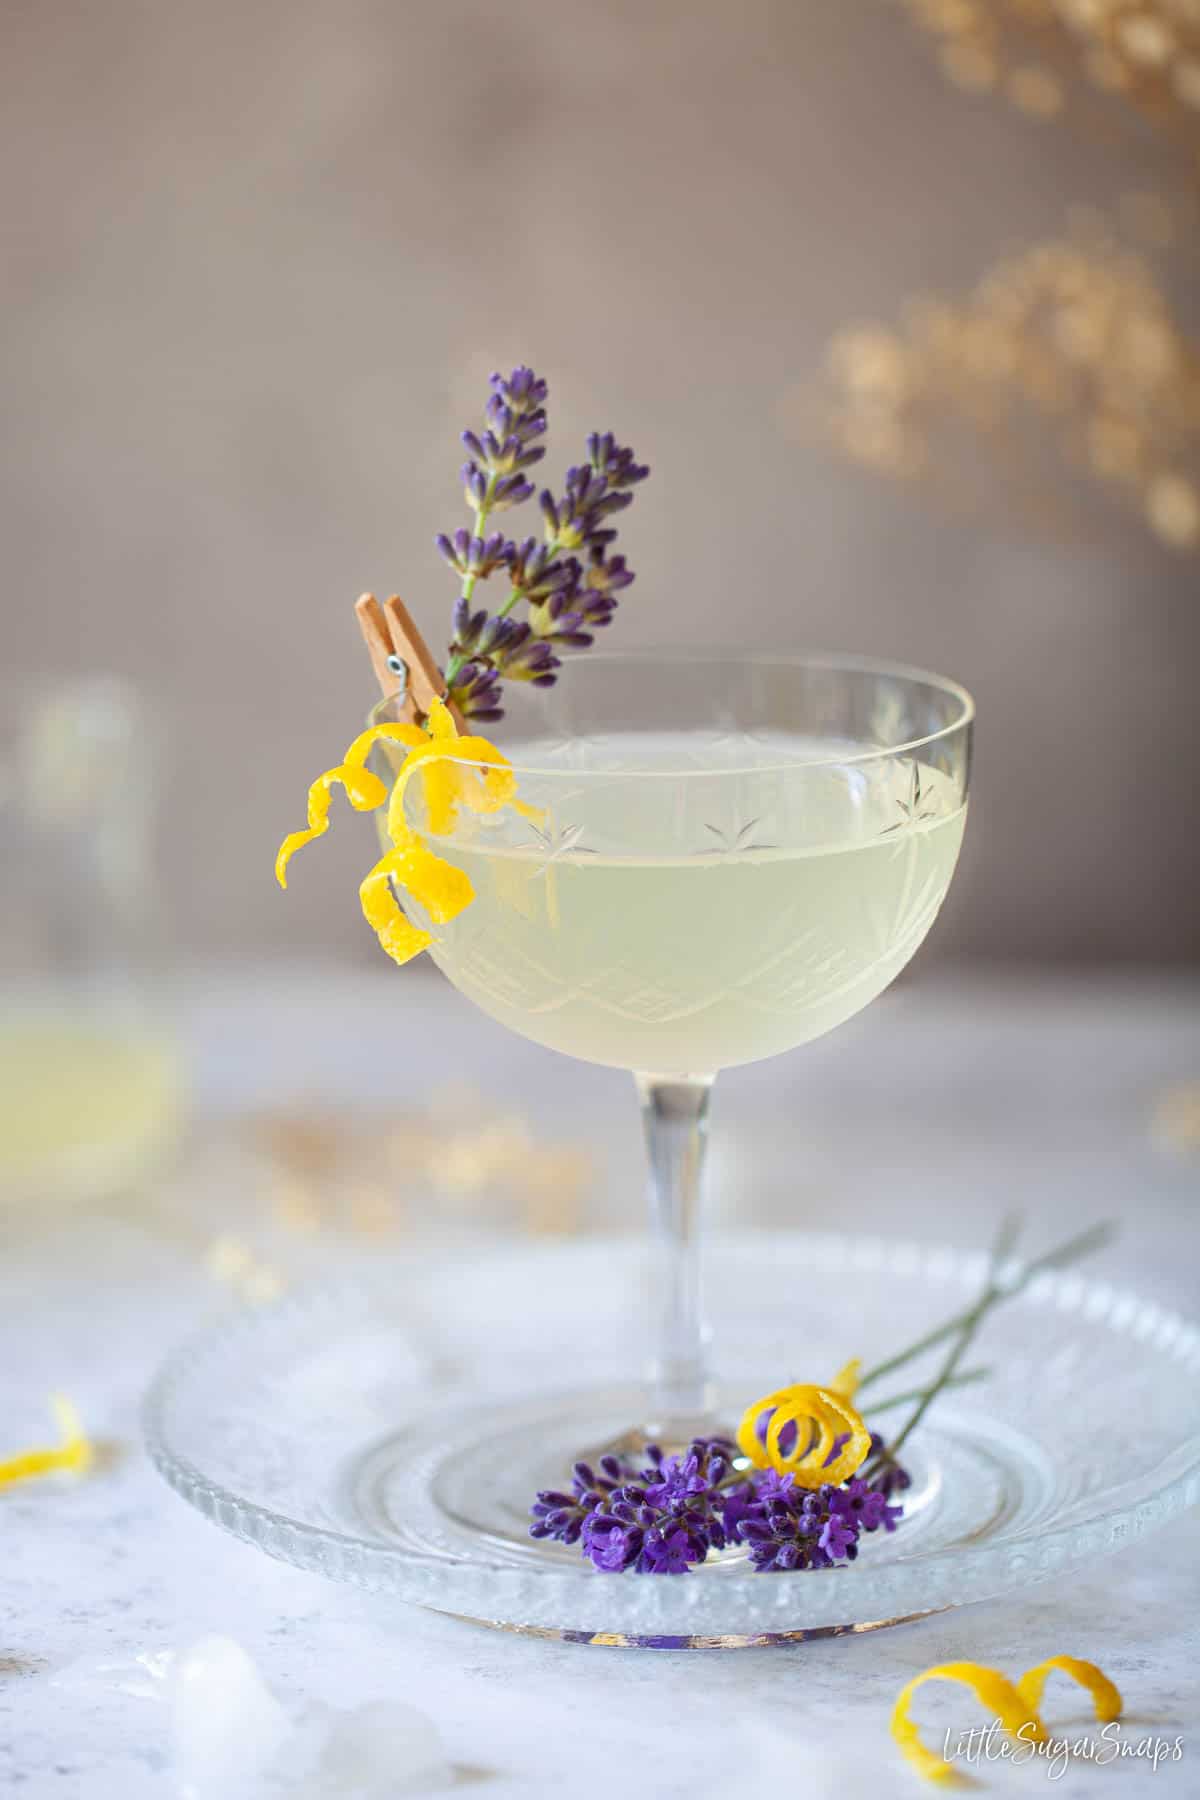 A limoncello cocktail garnished with lavender and lemon zest.